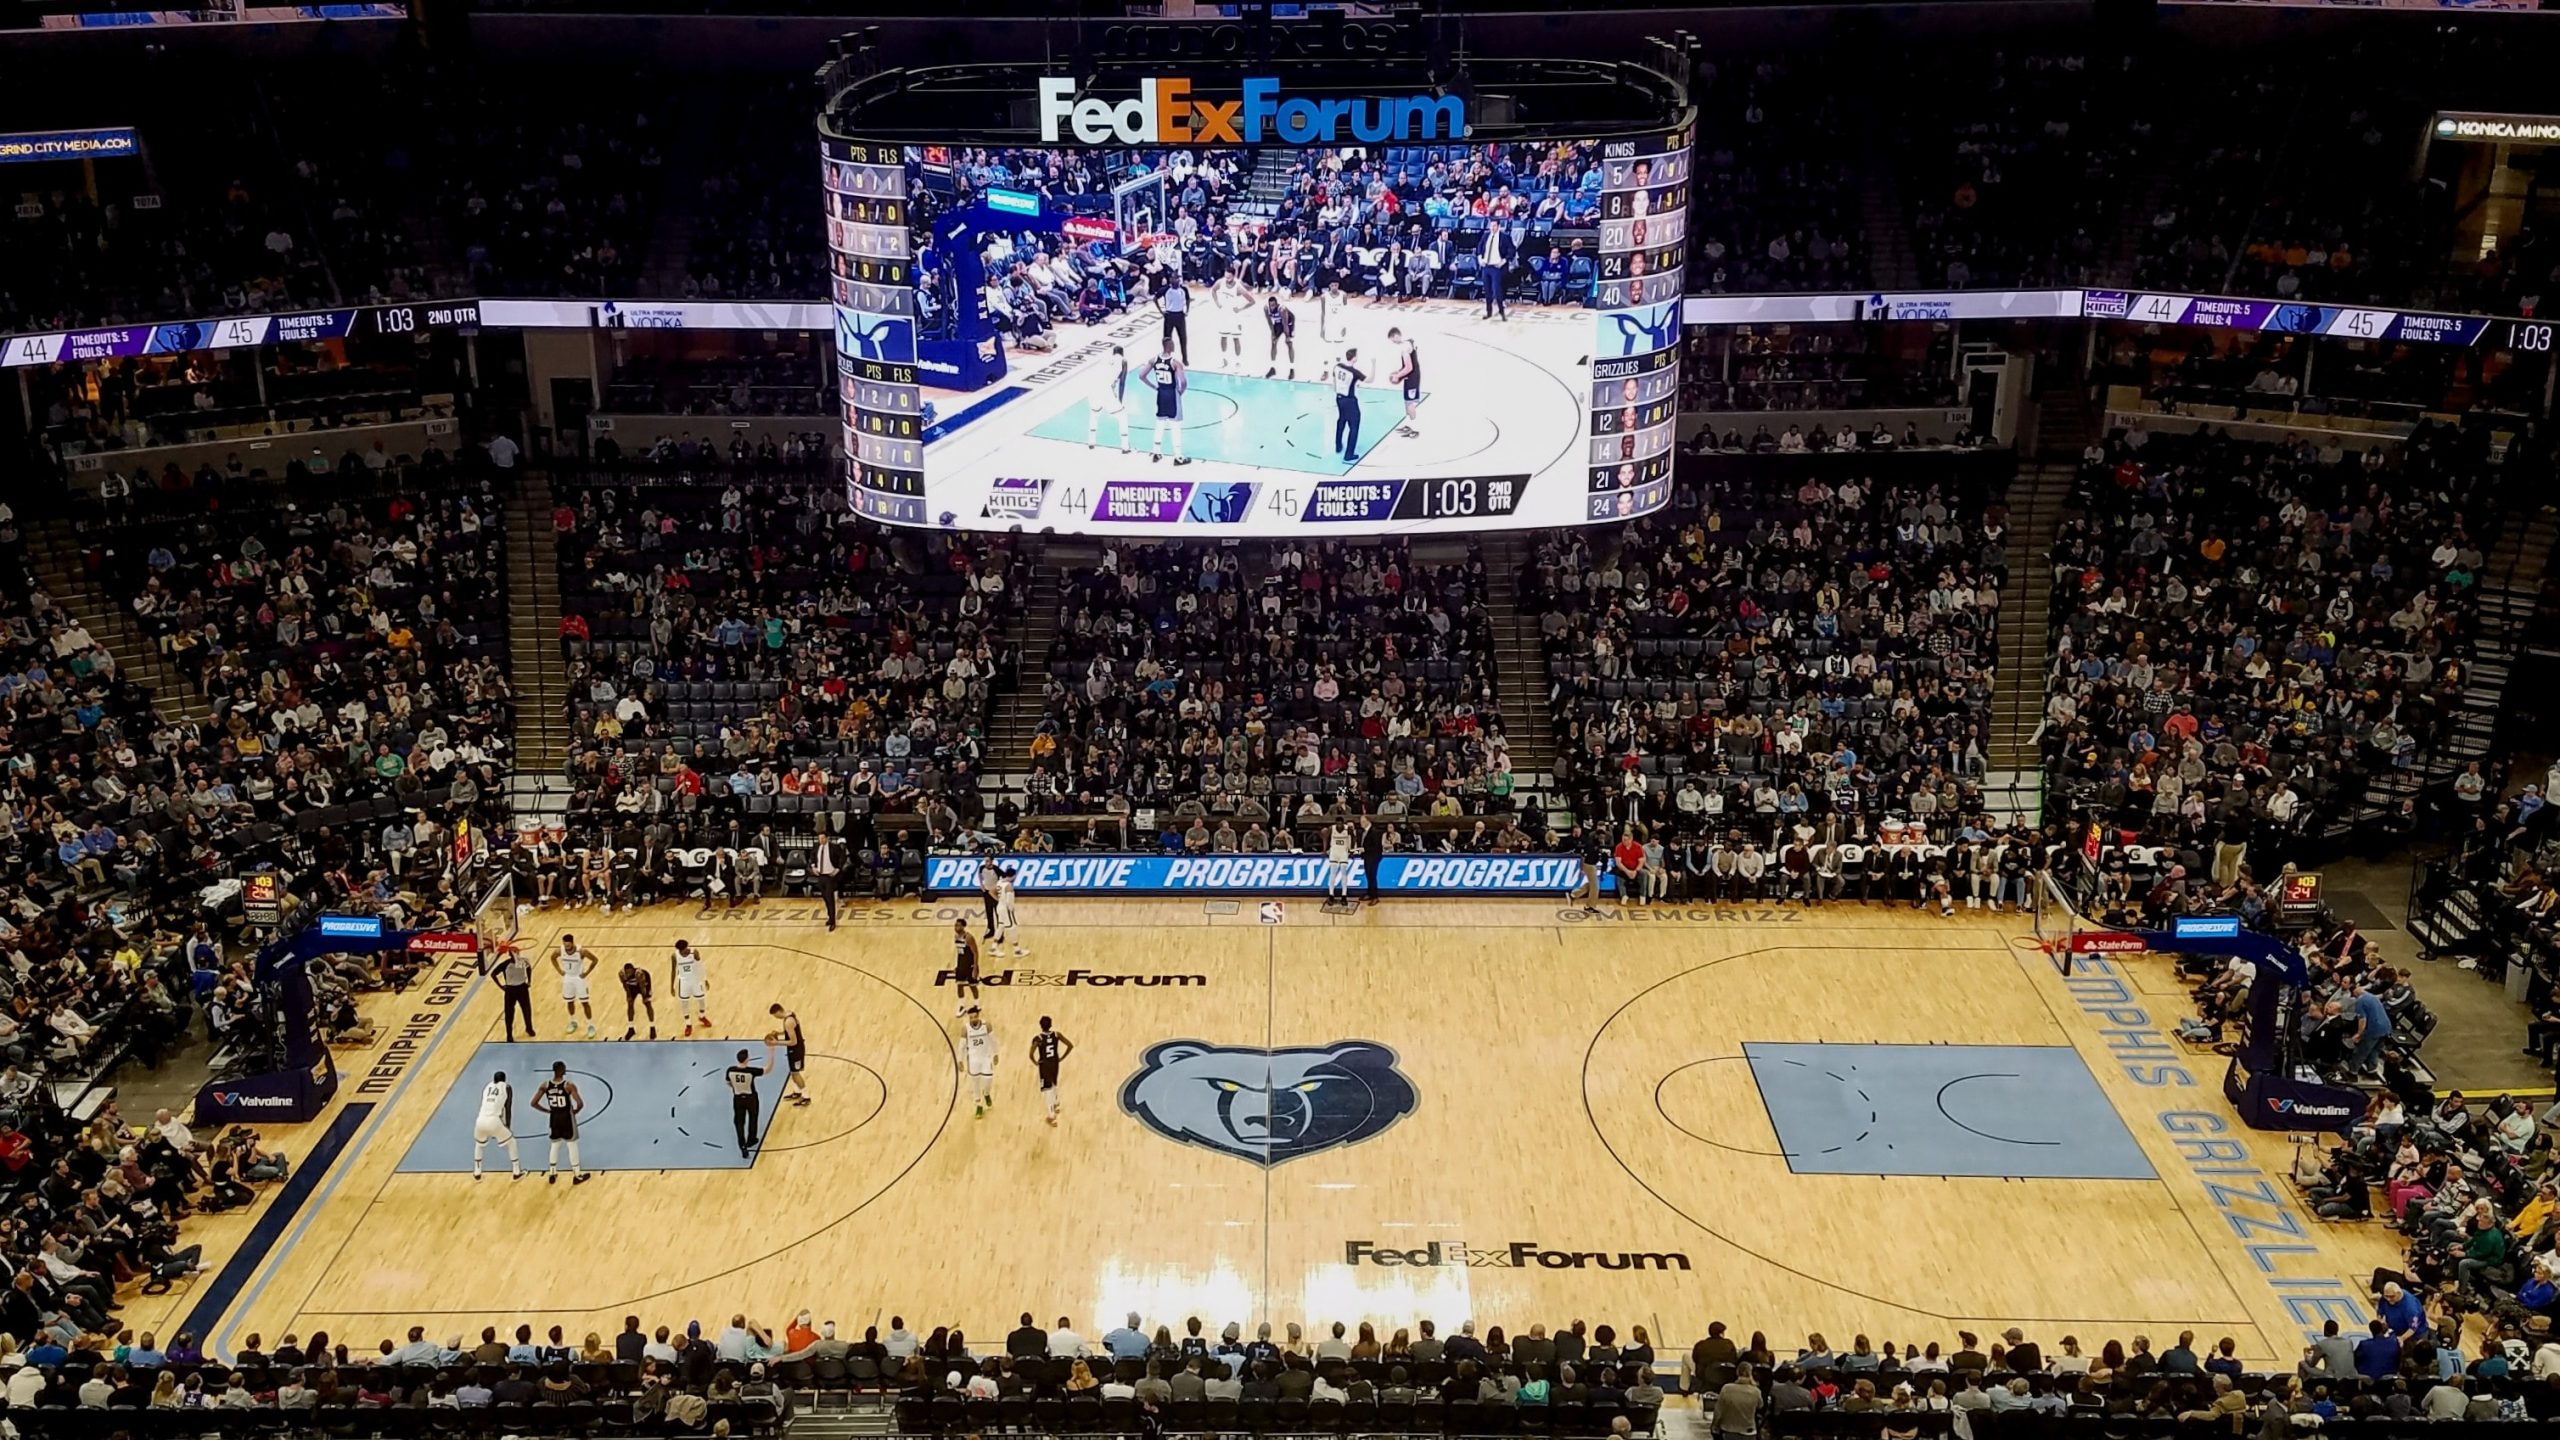 Memphis Grizzlies playing at the FedEx Forum